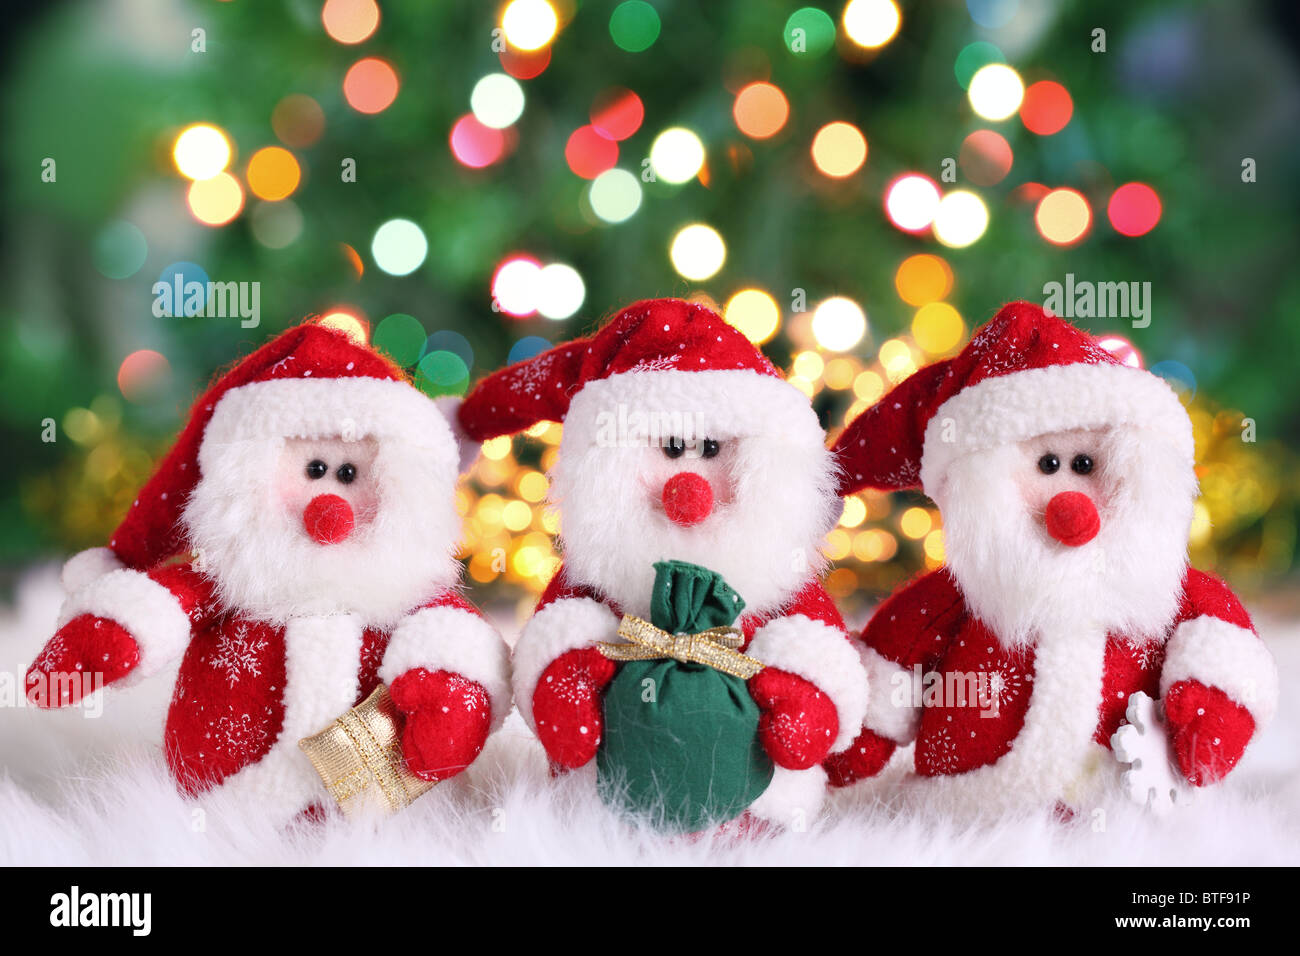 Decorative doll of a Santa Claus on festive background Stock Photo